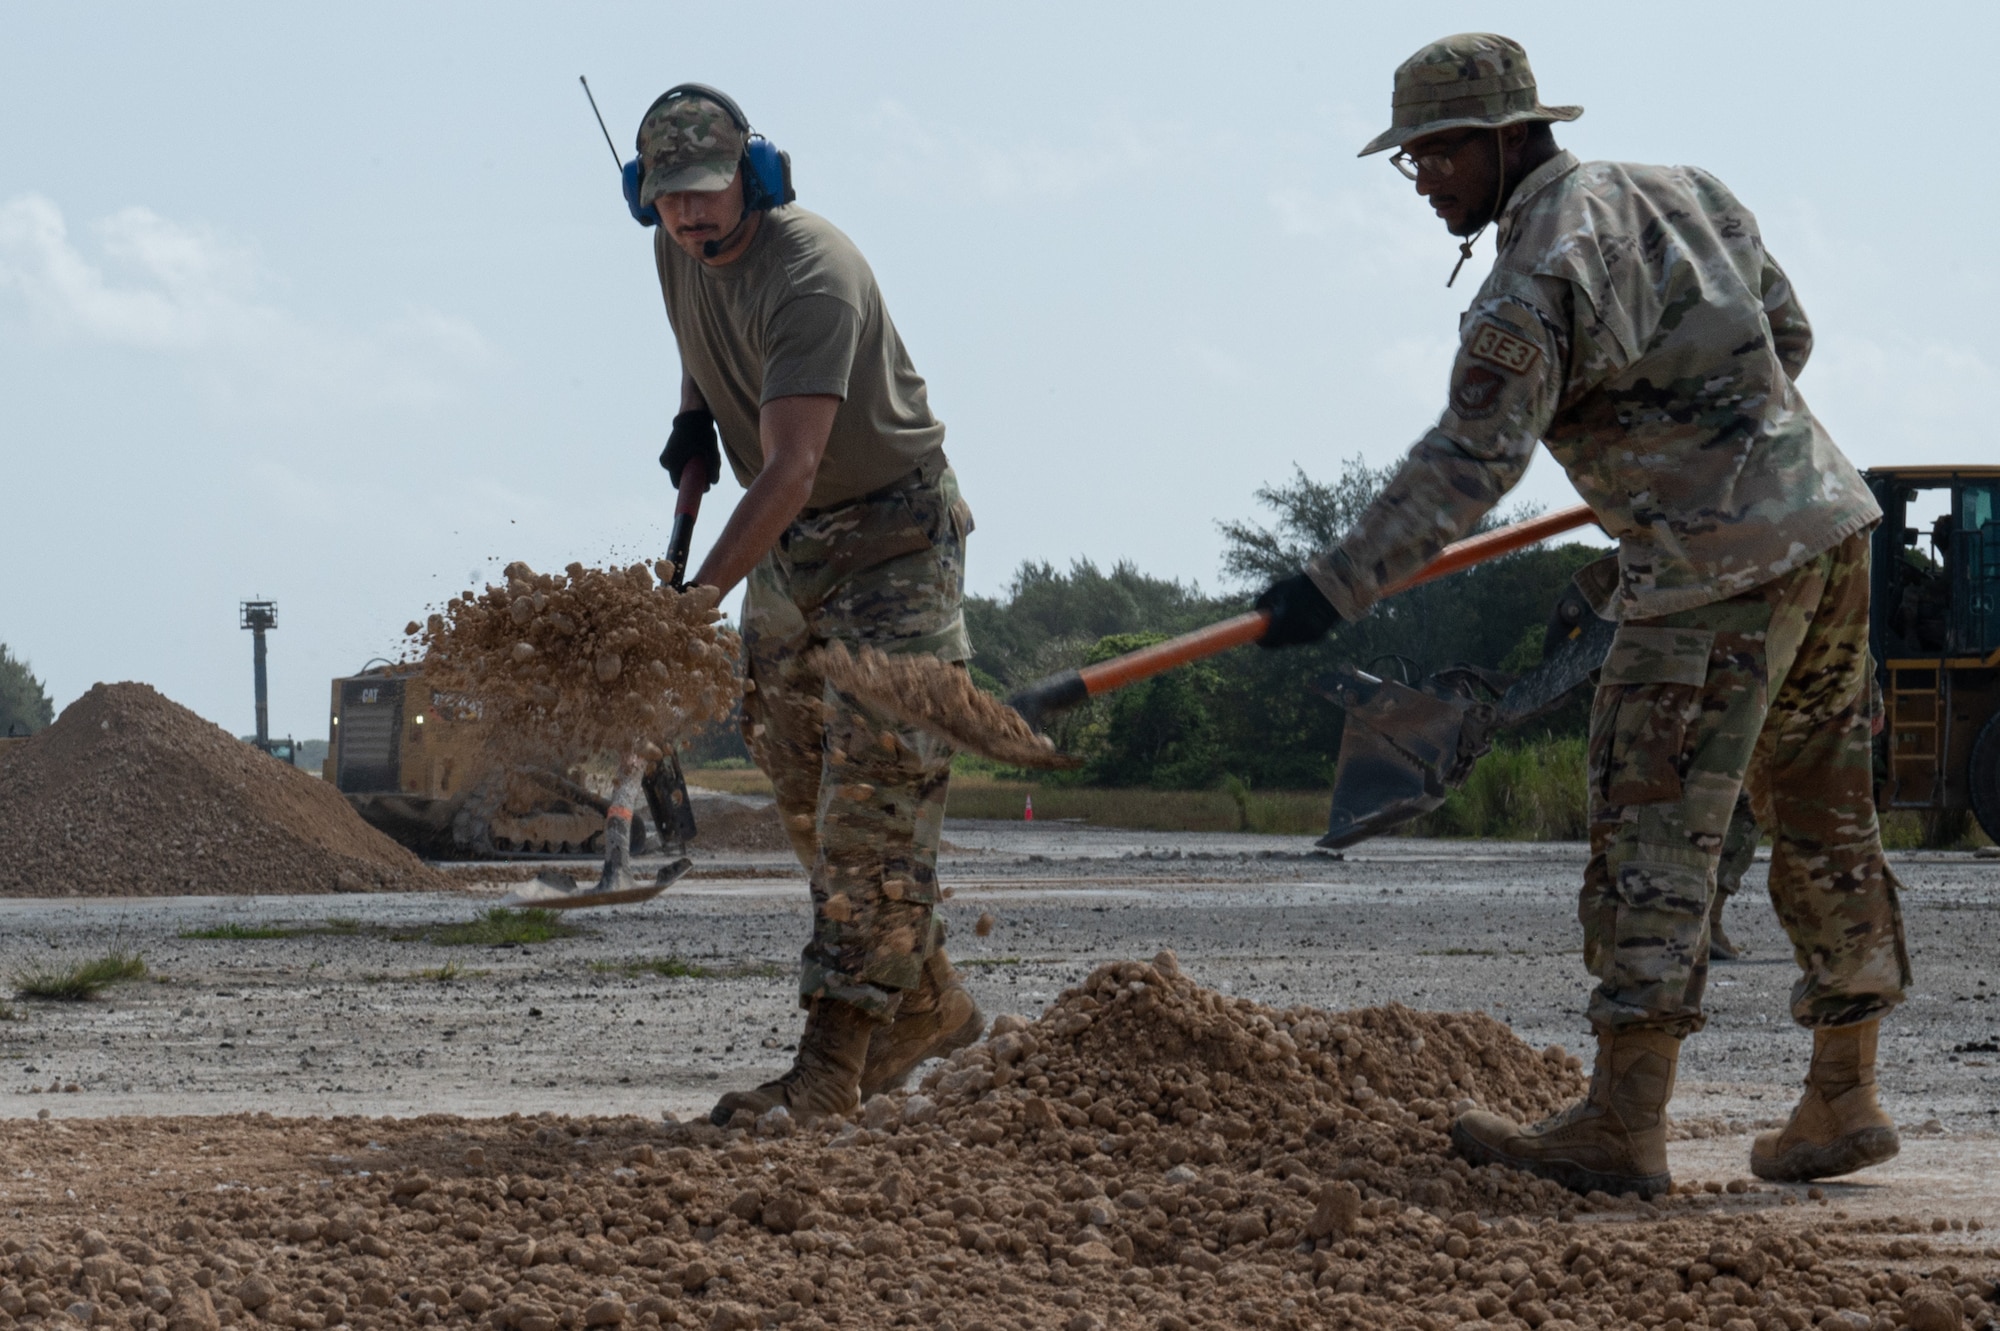 Airmen assigned to the 36th Civil Engineer Squadron shovel debris during an expedient and expeditionary airfield damage repair demonstration hosted by Headquarters Pacific Air Forces Civil Engineer Division at the Pacific Regional Training Center-Andersen, Guam, April 20, 2023. Sixteen Airmen from the 36th CES were provided two days of vehicle and material familiarization from the 554th Rapid Engineer Deployable Heavy Operational Repair Squadron Engineers and the Air Force Civil Engineer Center to complete airfield damage repair using the smaller packages of Airmen and equipment, called E-ADR. They used their familiarization to validate the E-ADR concept, in support of a Pacific Air Forces agile combat employment initiative, repairing 10 craters with a lighter and leaner vehicle and equipment kit that weighs a fraction of a standard Rapid Airfield Damage Recovery package. (U.S. Air Force photo by Staff Sgt. Suzie Plotnikov)